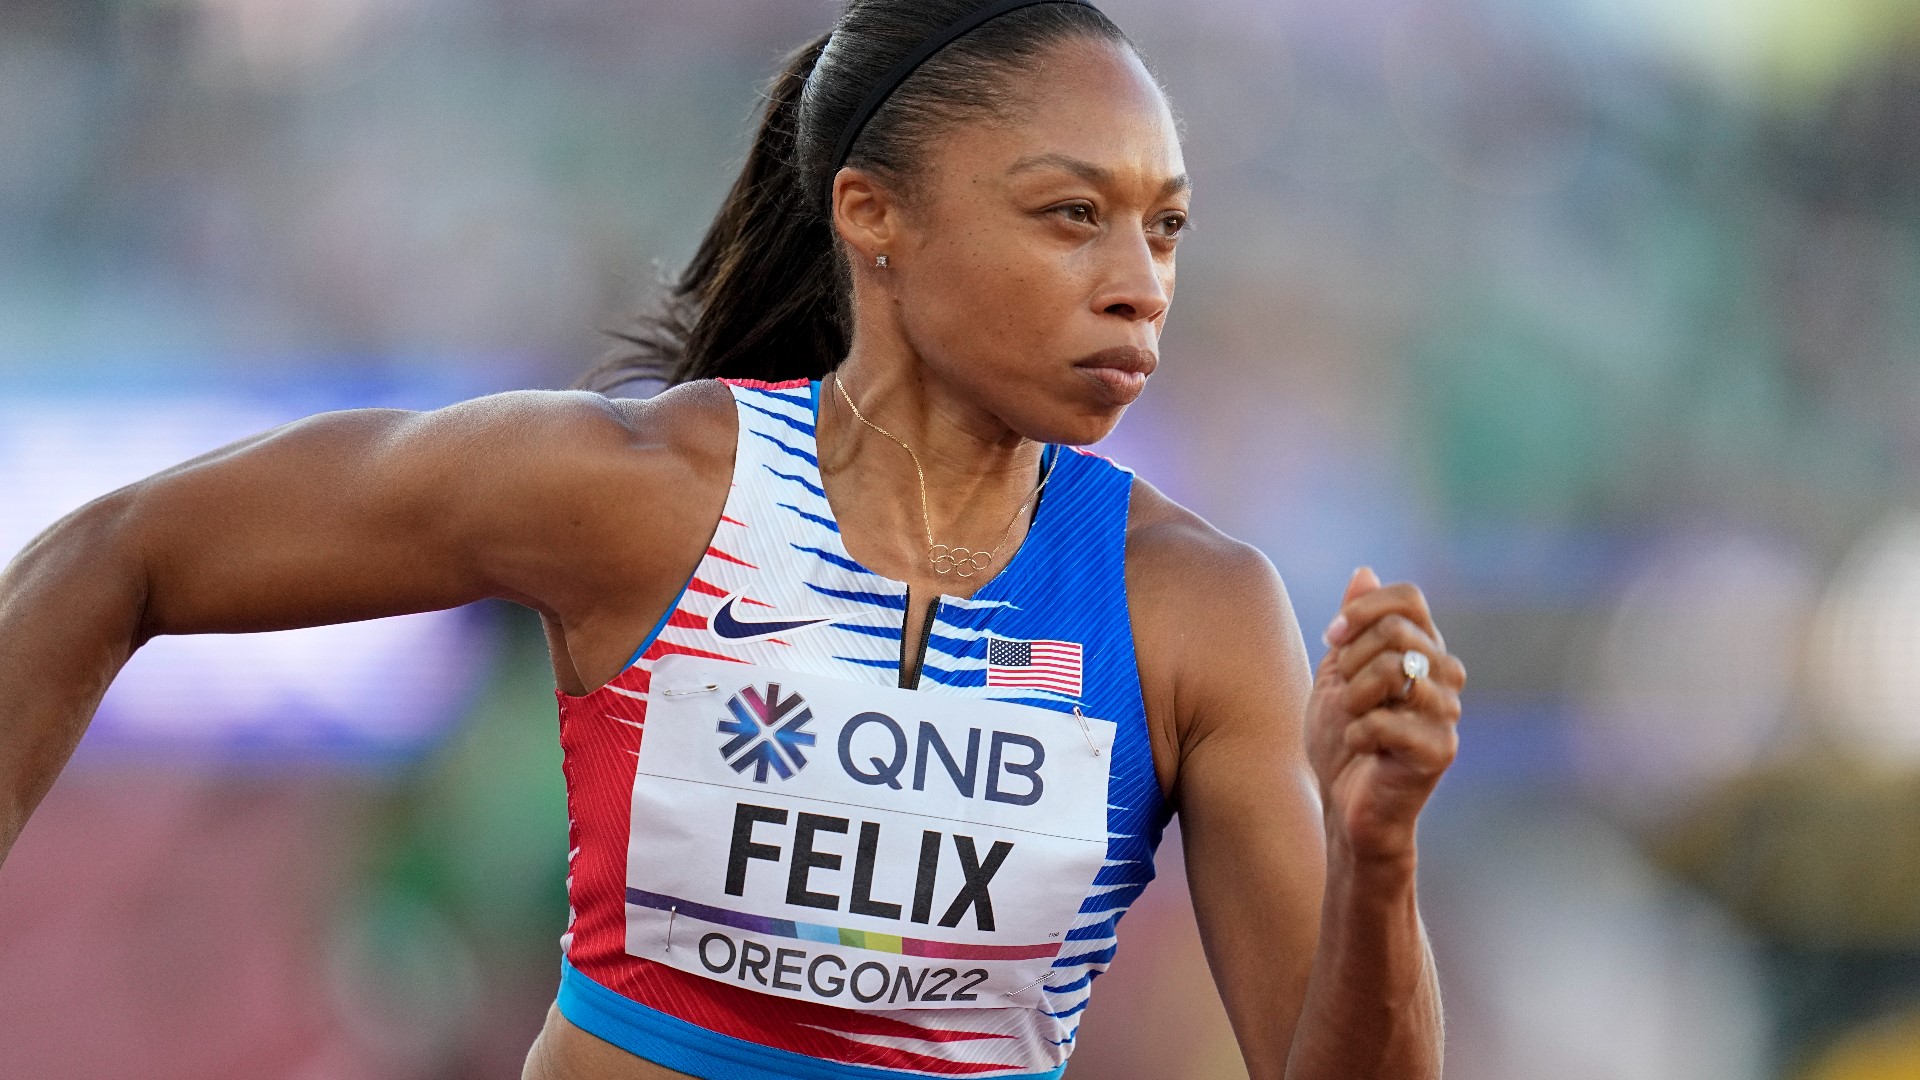 Felix won her 19th and final medal in the world championships Friday night.